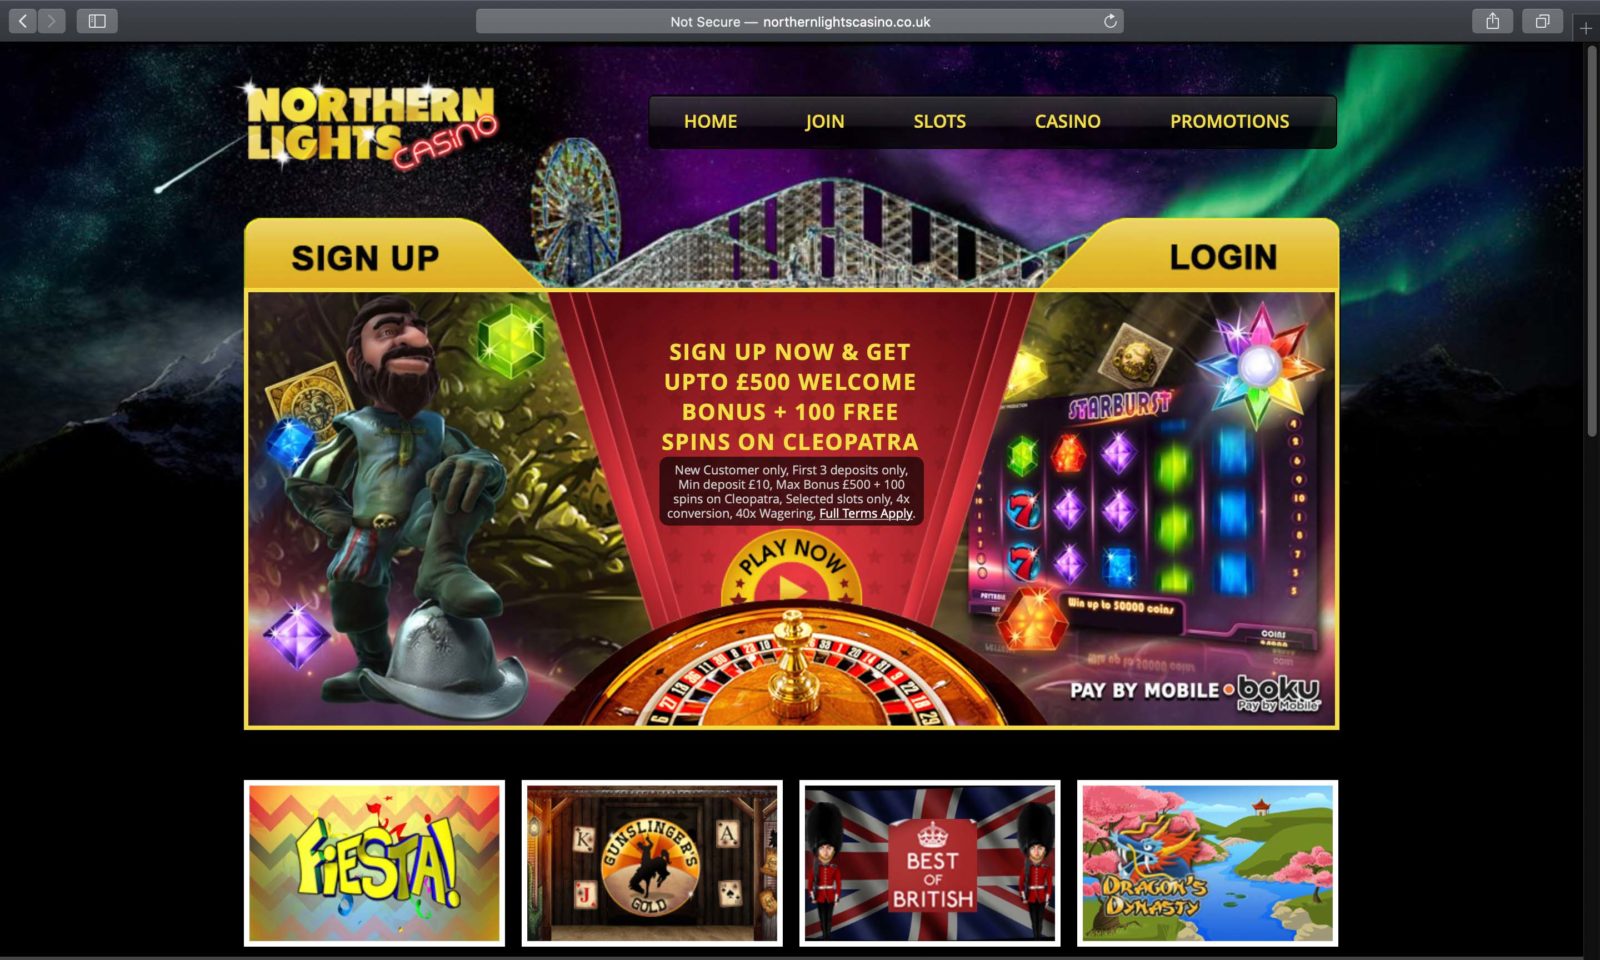 northern lights casino prize drawings